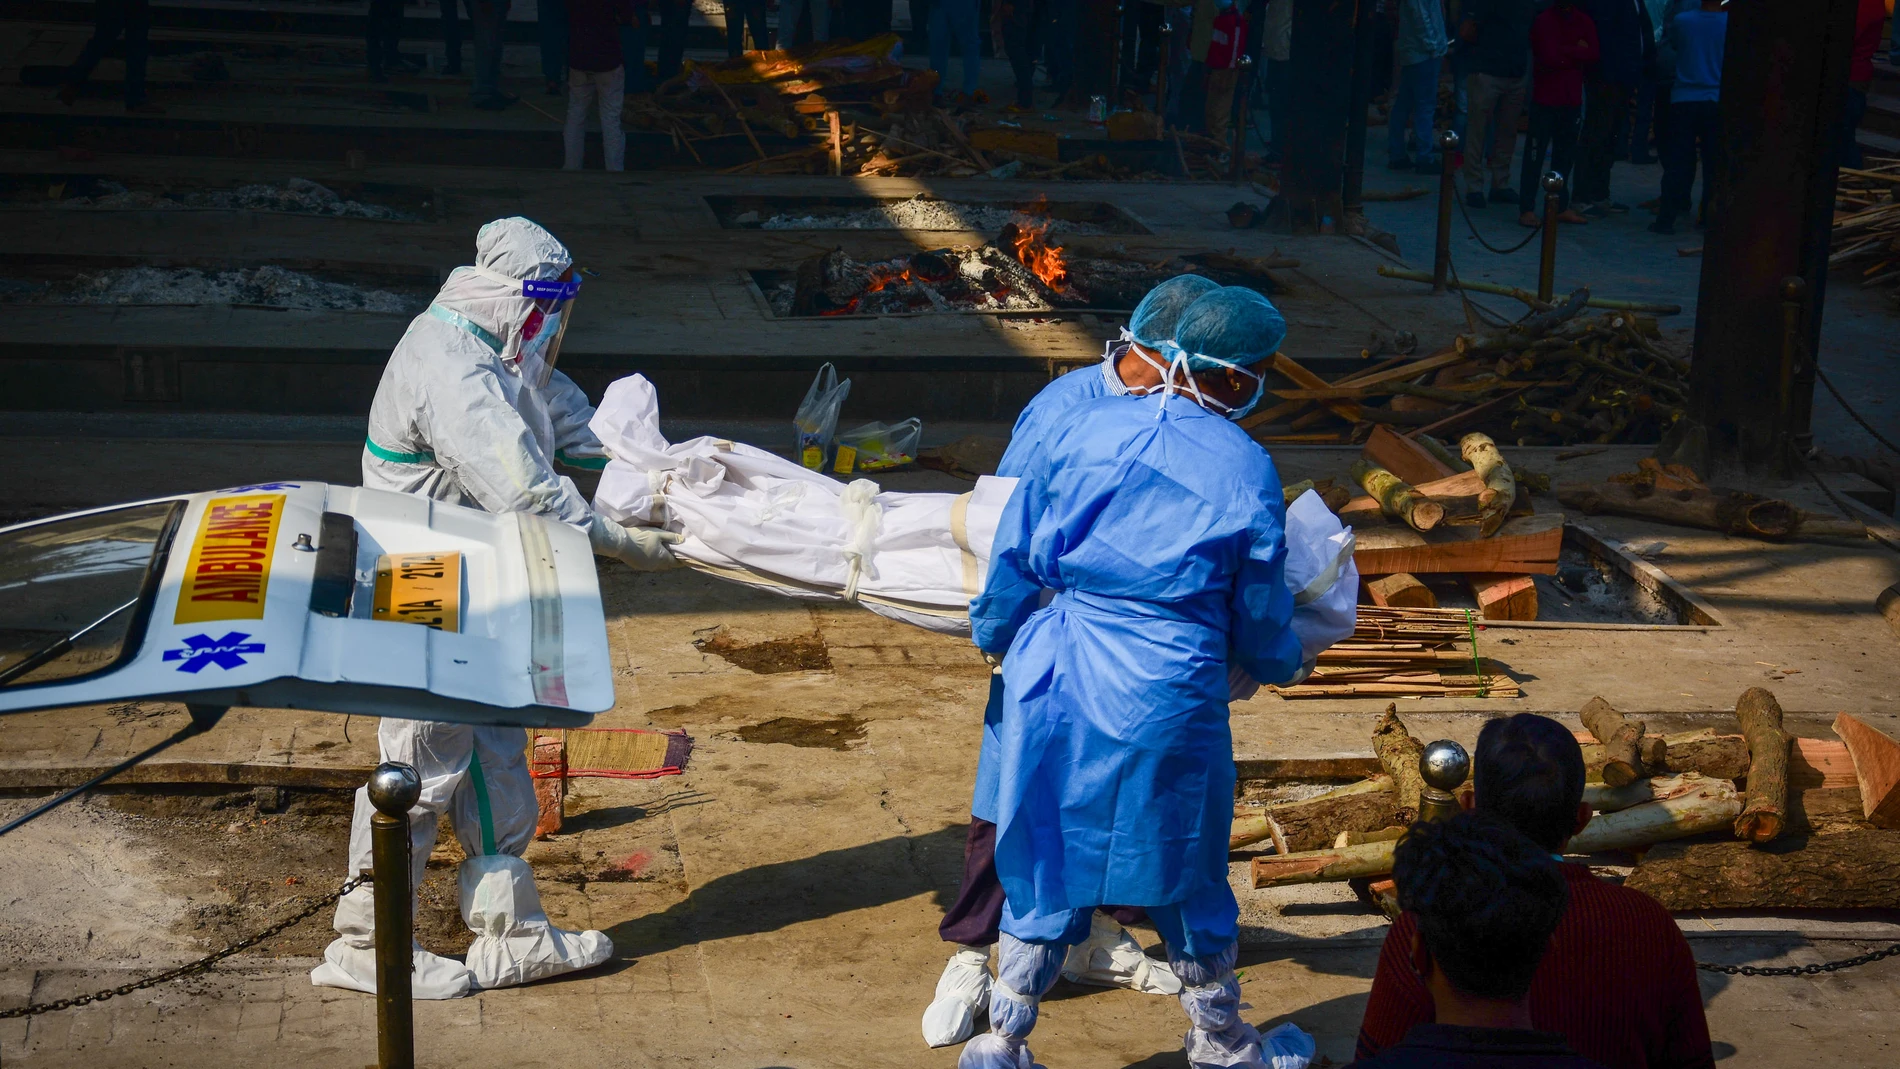 19 November 2020, India, New Delhi: Health workers carry the body of a coronavirus victim at the Nigambodh Ghat crematorium. Photo: Manish Rajput/SOPA Images via ZUMA Wire/dpaManish Rajput/SOPA Images via ZU / DPA19/11/2020 ONLY FOR USE IN SPAIN